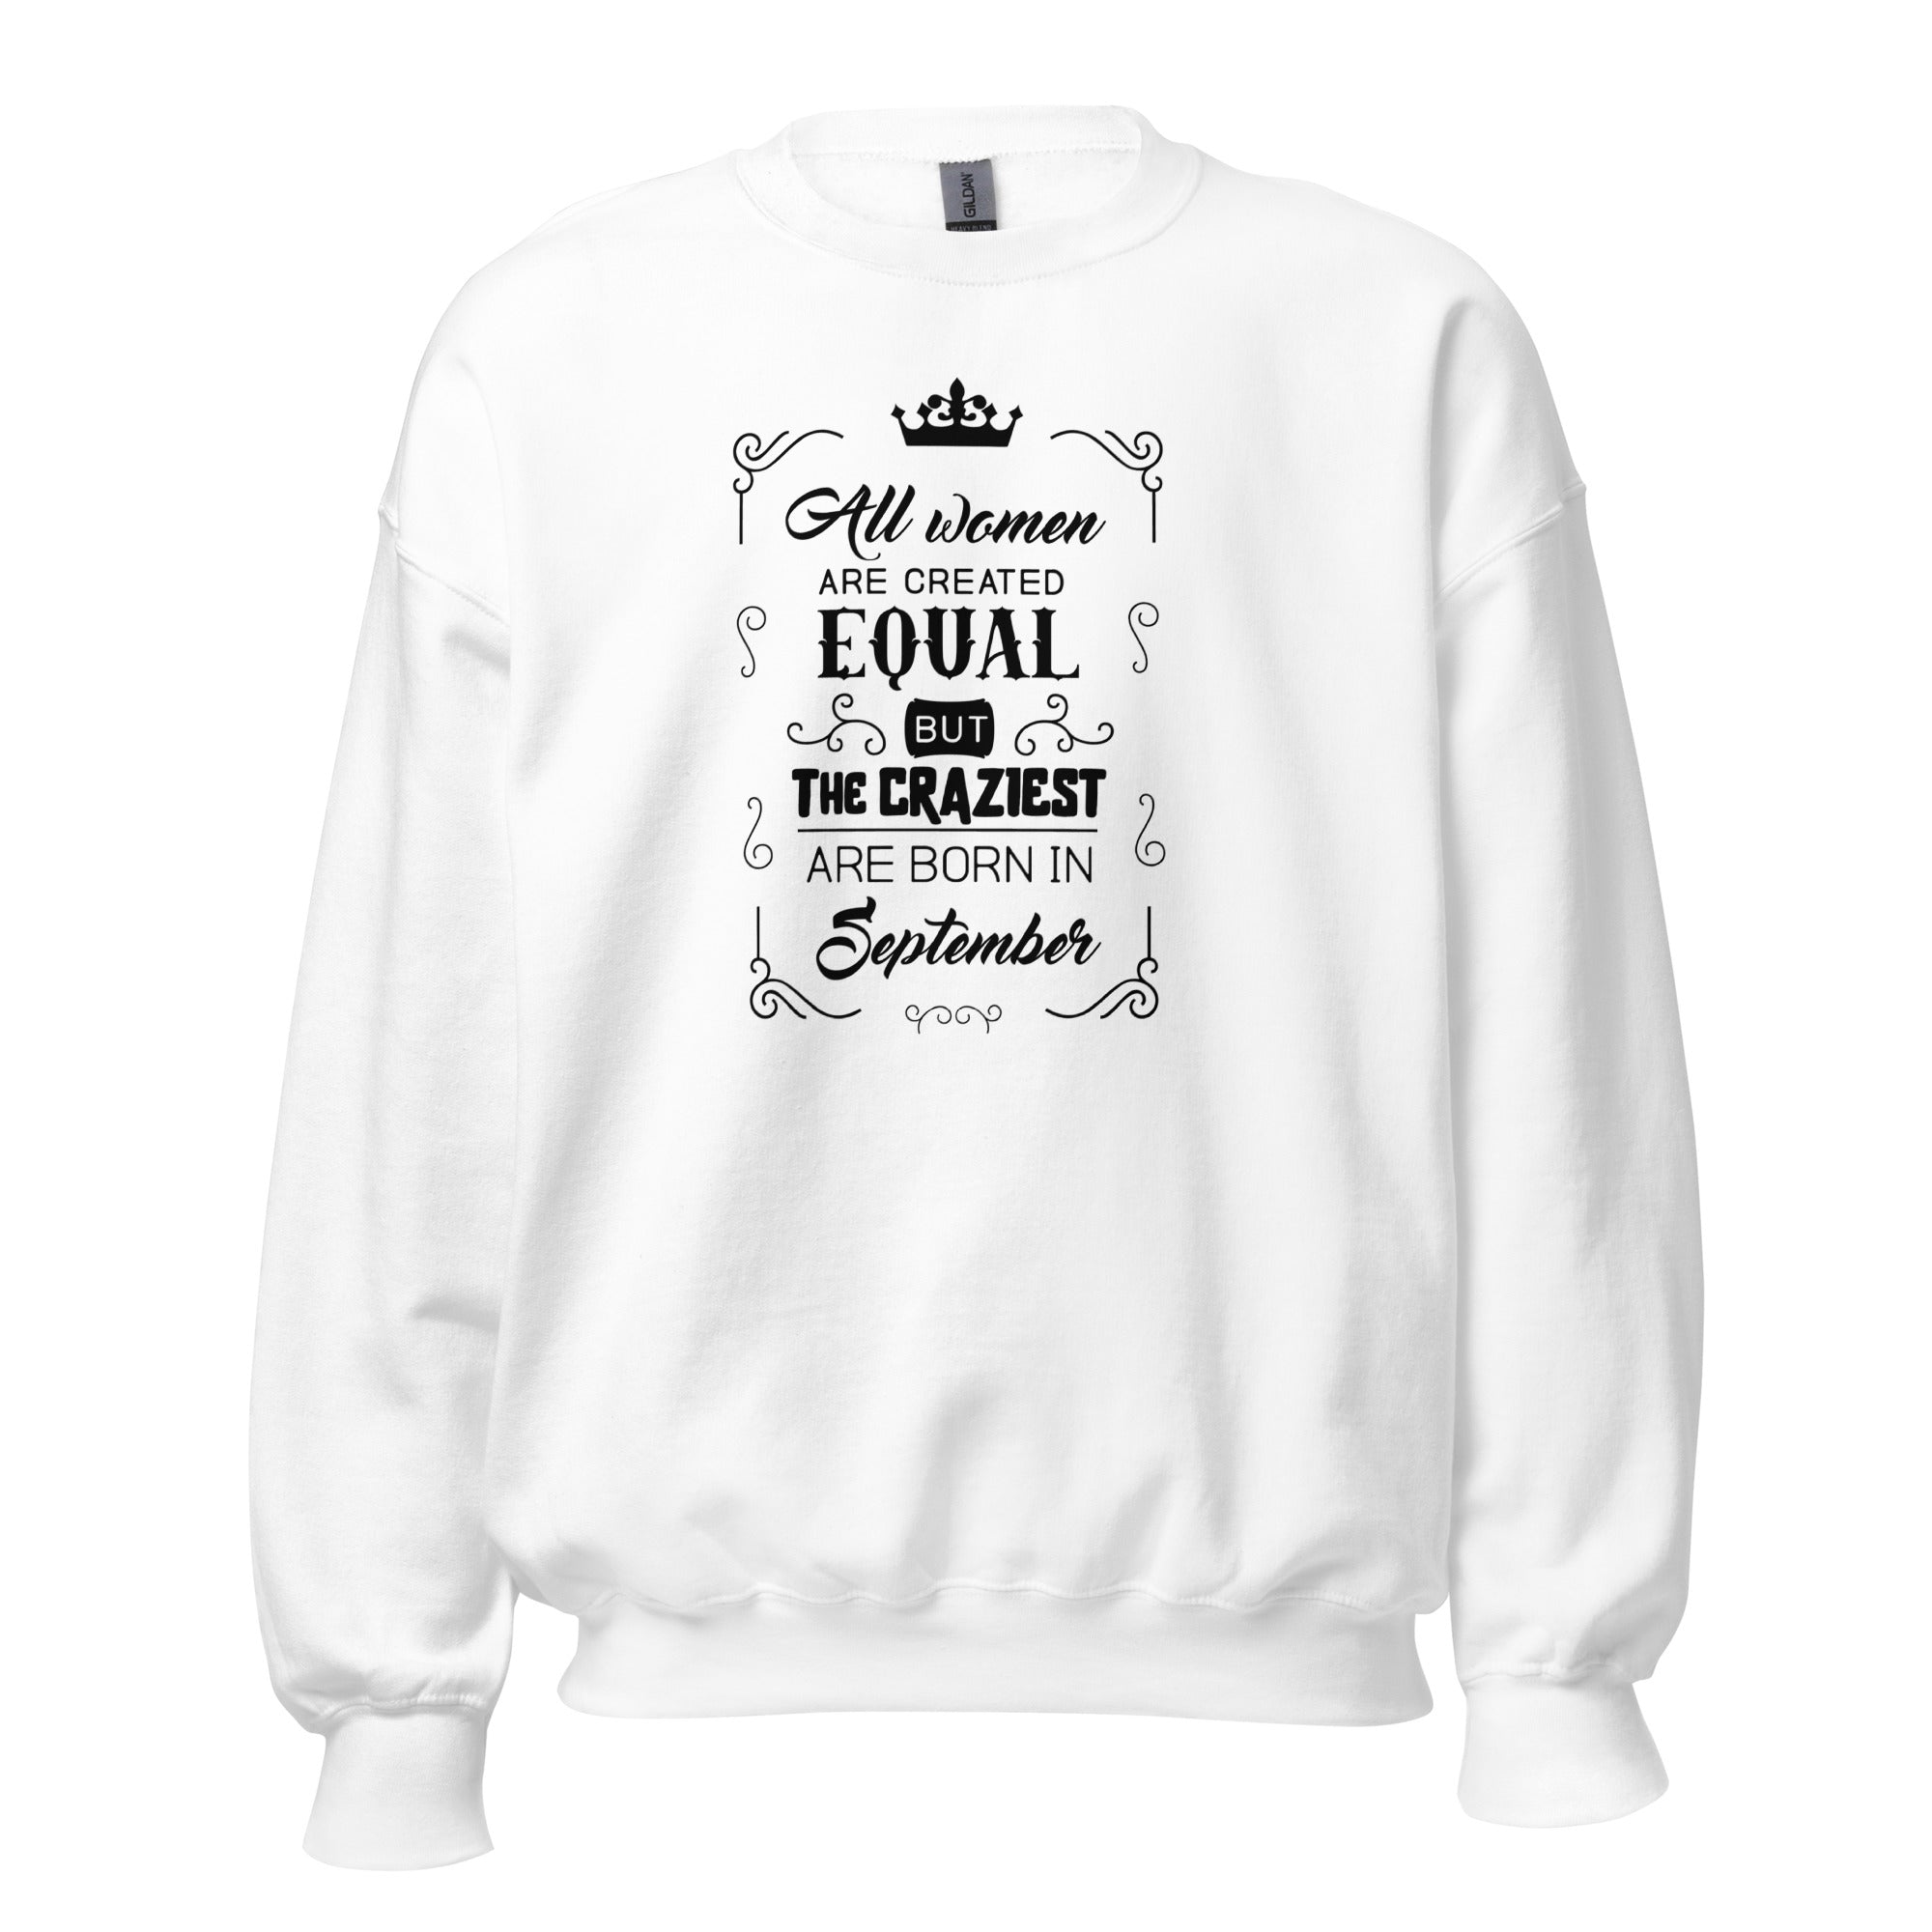 Women's Crew Neck Sweatshirt - All Women Are Created Equal But The Craziest Are Born In September - GRAPHIC T-SHIRTS